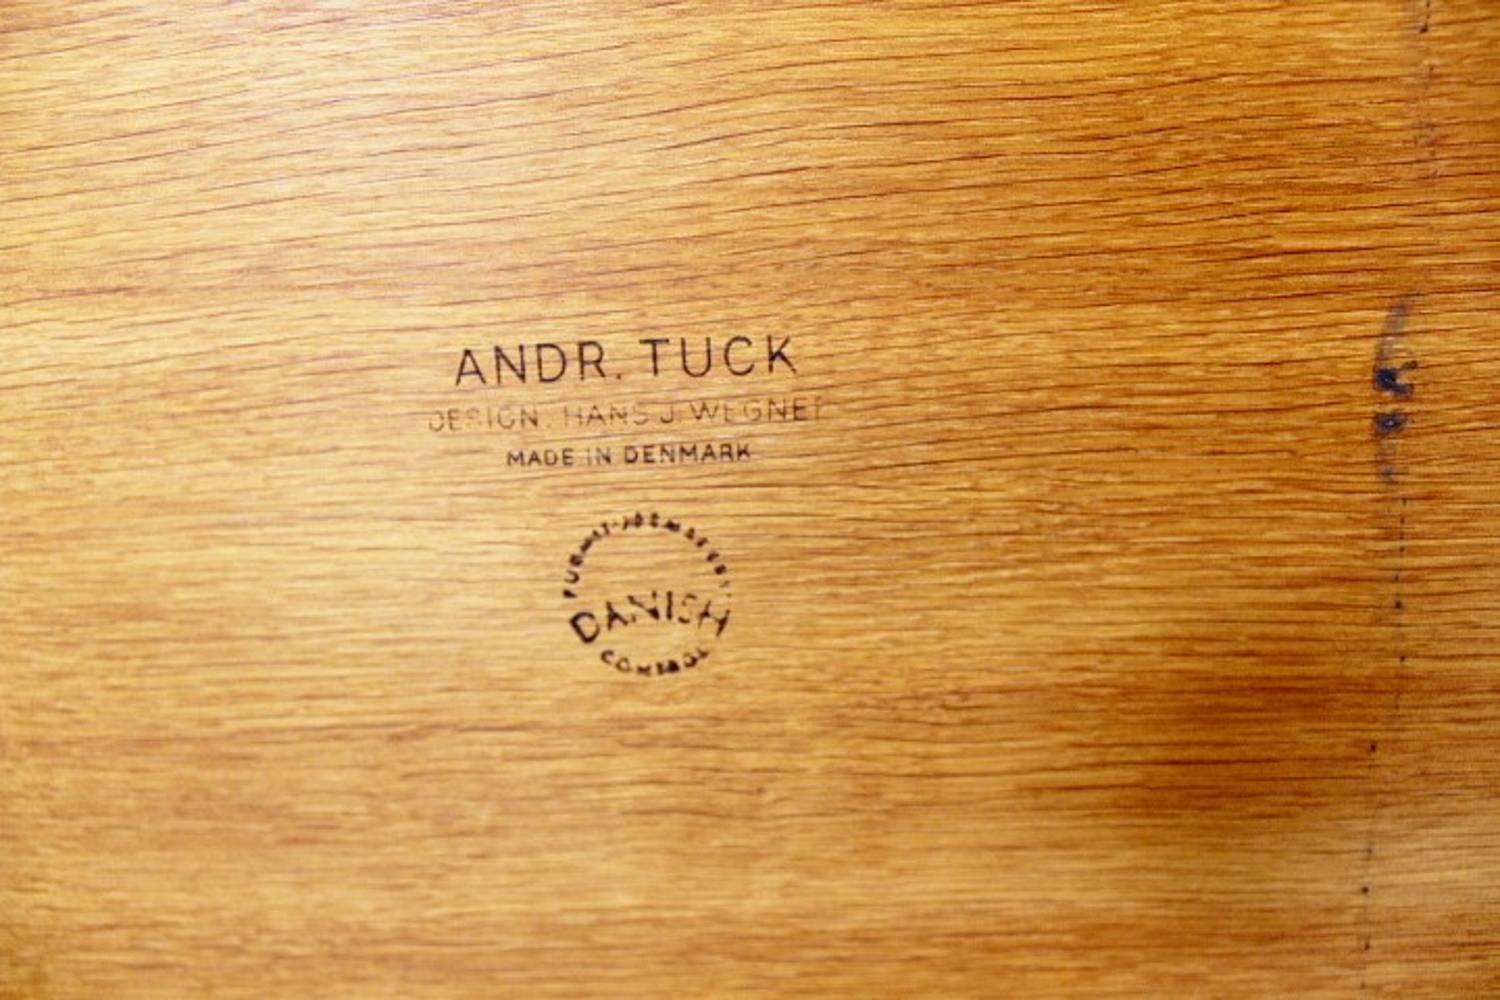 Sewing Table in Solid Oak by Hans J. Wegner, 1959 for Andreas Tuck, Model AT-33 3